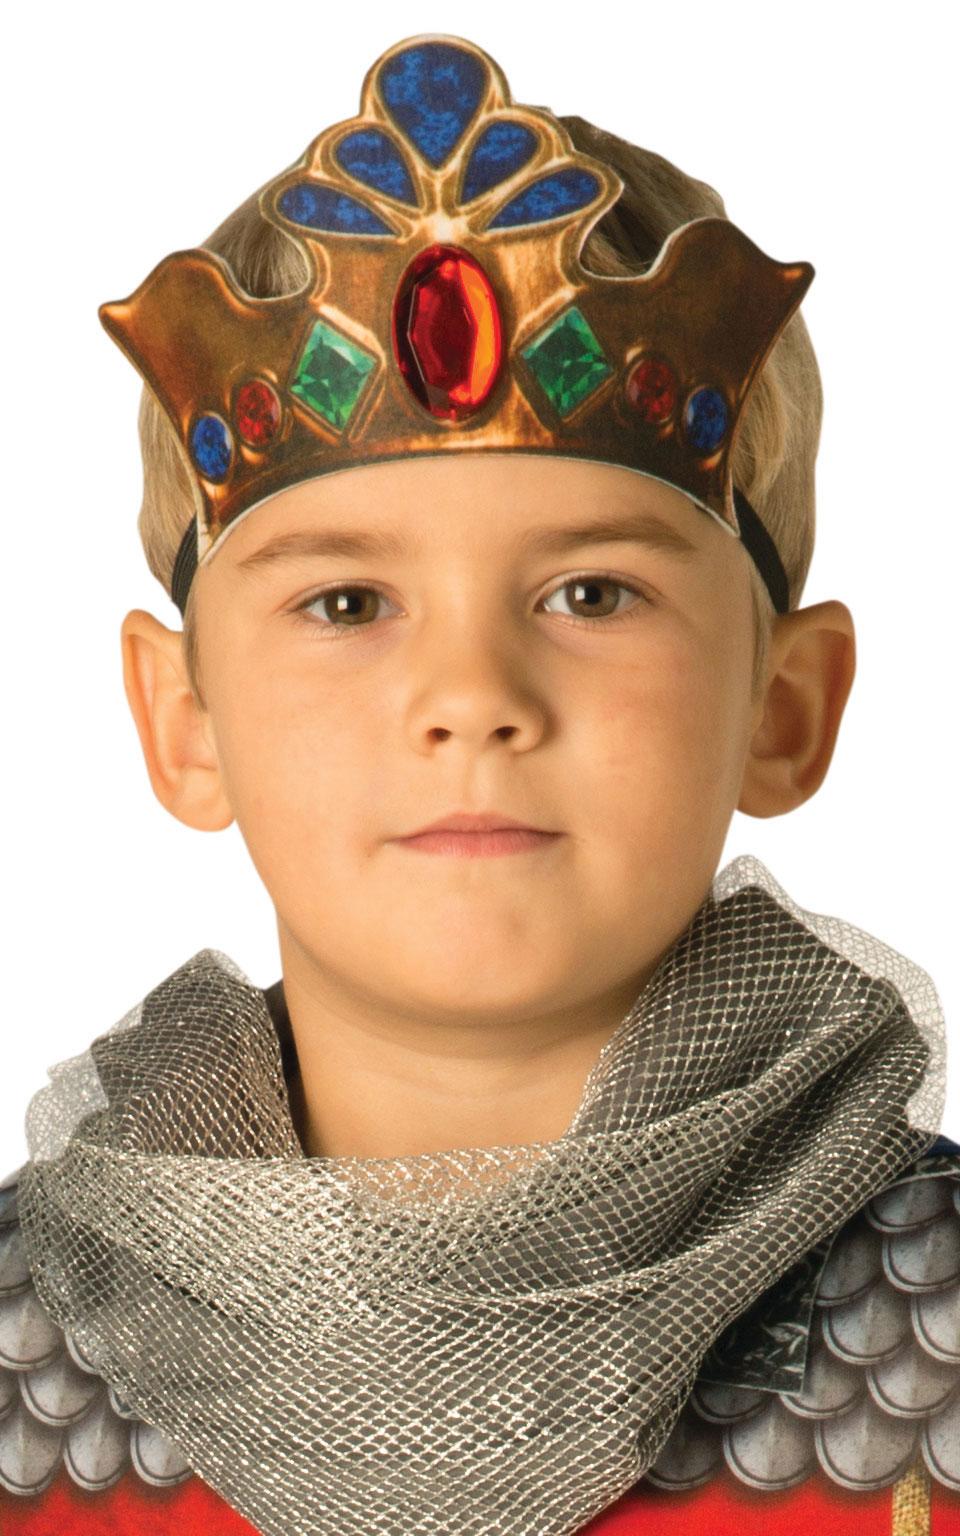 Soft crown included with our boy's King Arthur Fancy Dress Costume by Rubies 630701 available here at Karnival Costumes online party sho